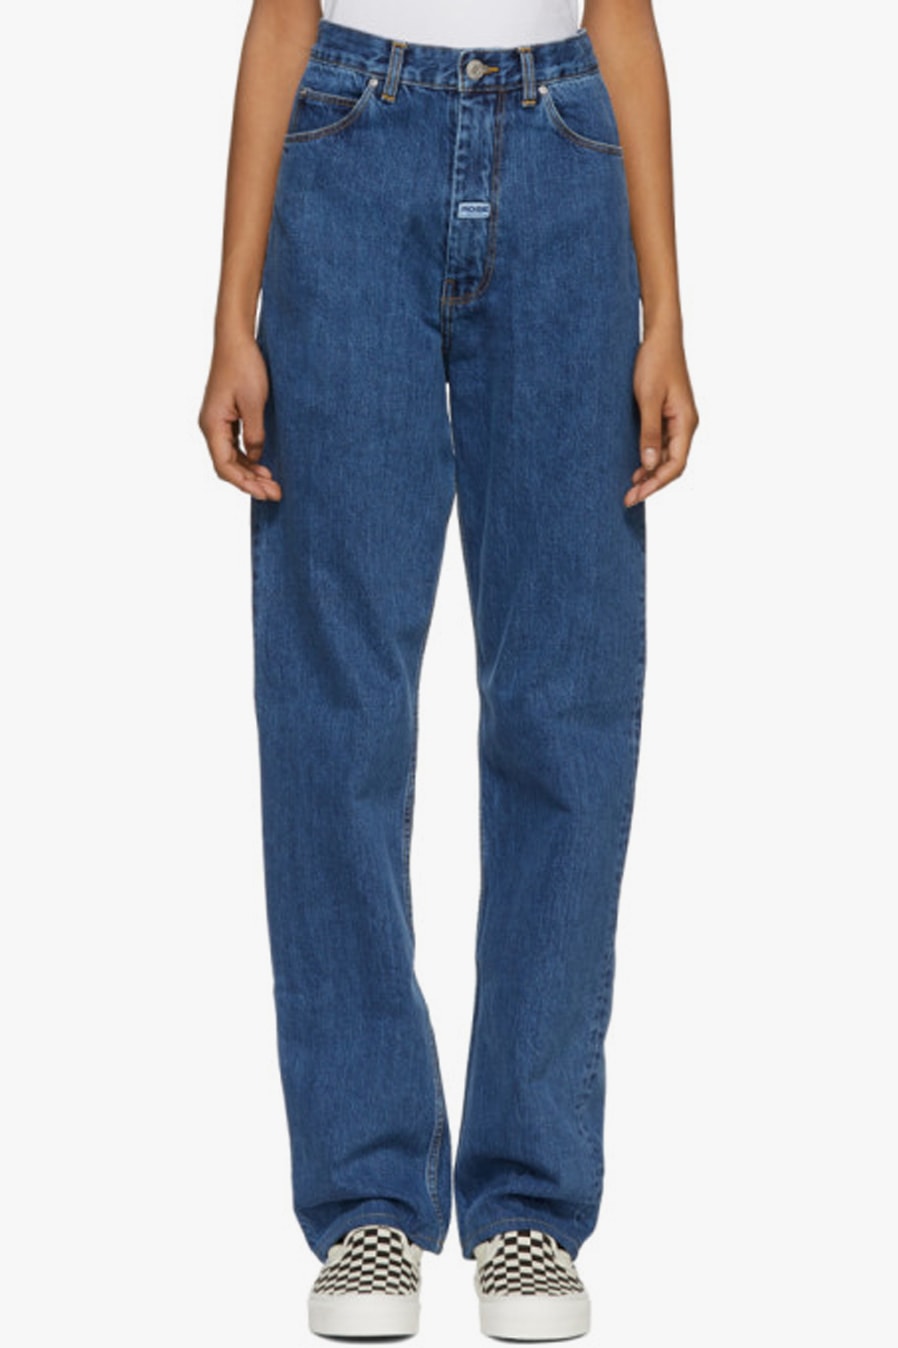 Martine Rose High Waisted Jeans